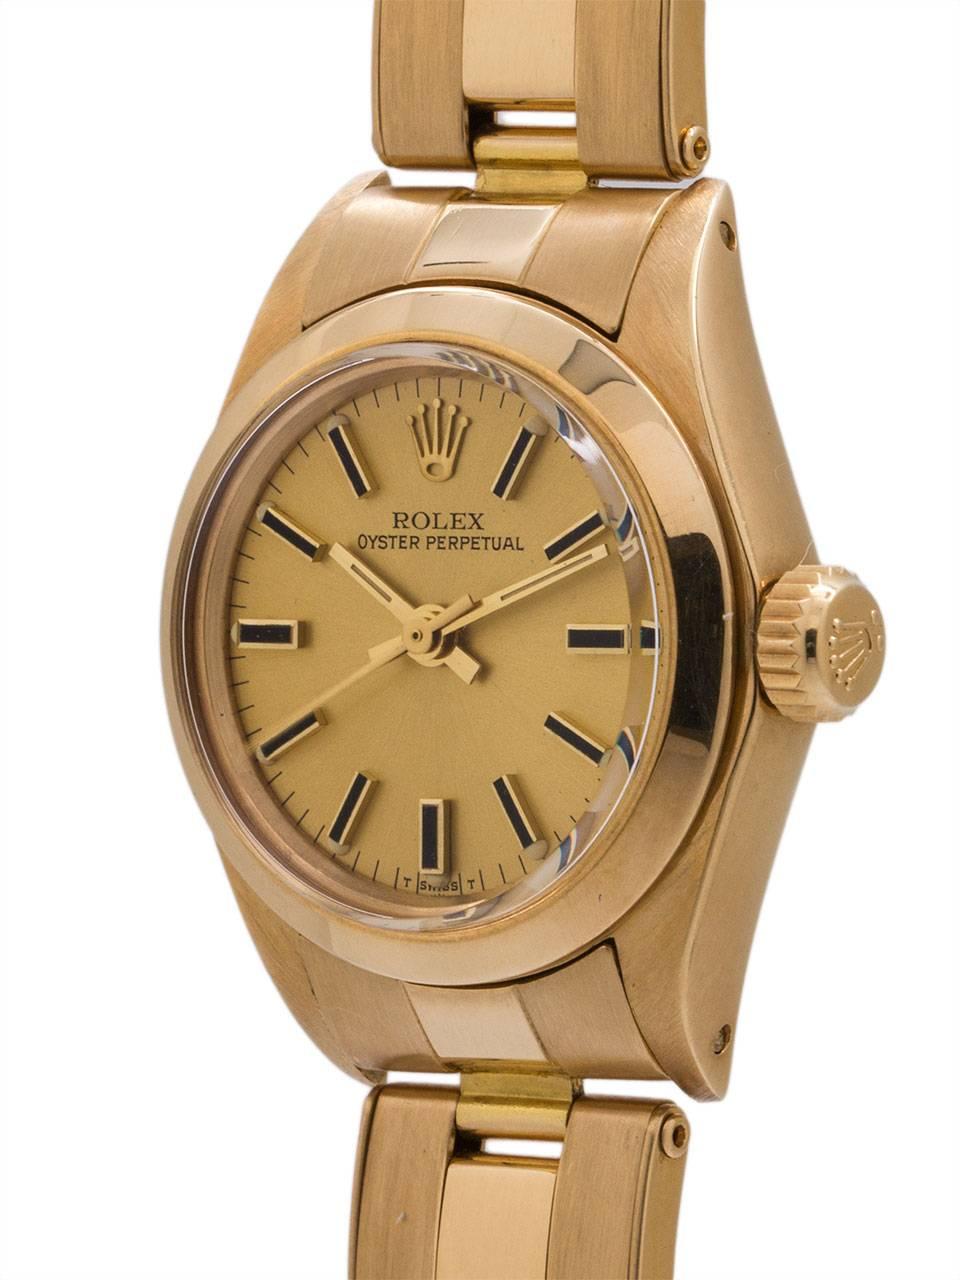 
Lady Rolex Oyster Perpetual 18K YG ref# 6718 serial #4.1 million circa 1976. Featuring 25 mm diameter Oyster case with smooth dome bezel, acrylic crystal, and beautiful condition original champagne dial with applied gold indexes and gilt baton